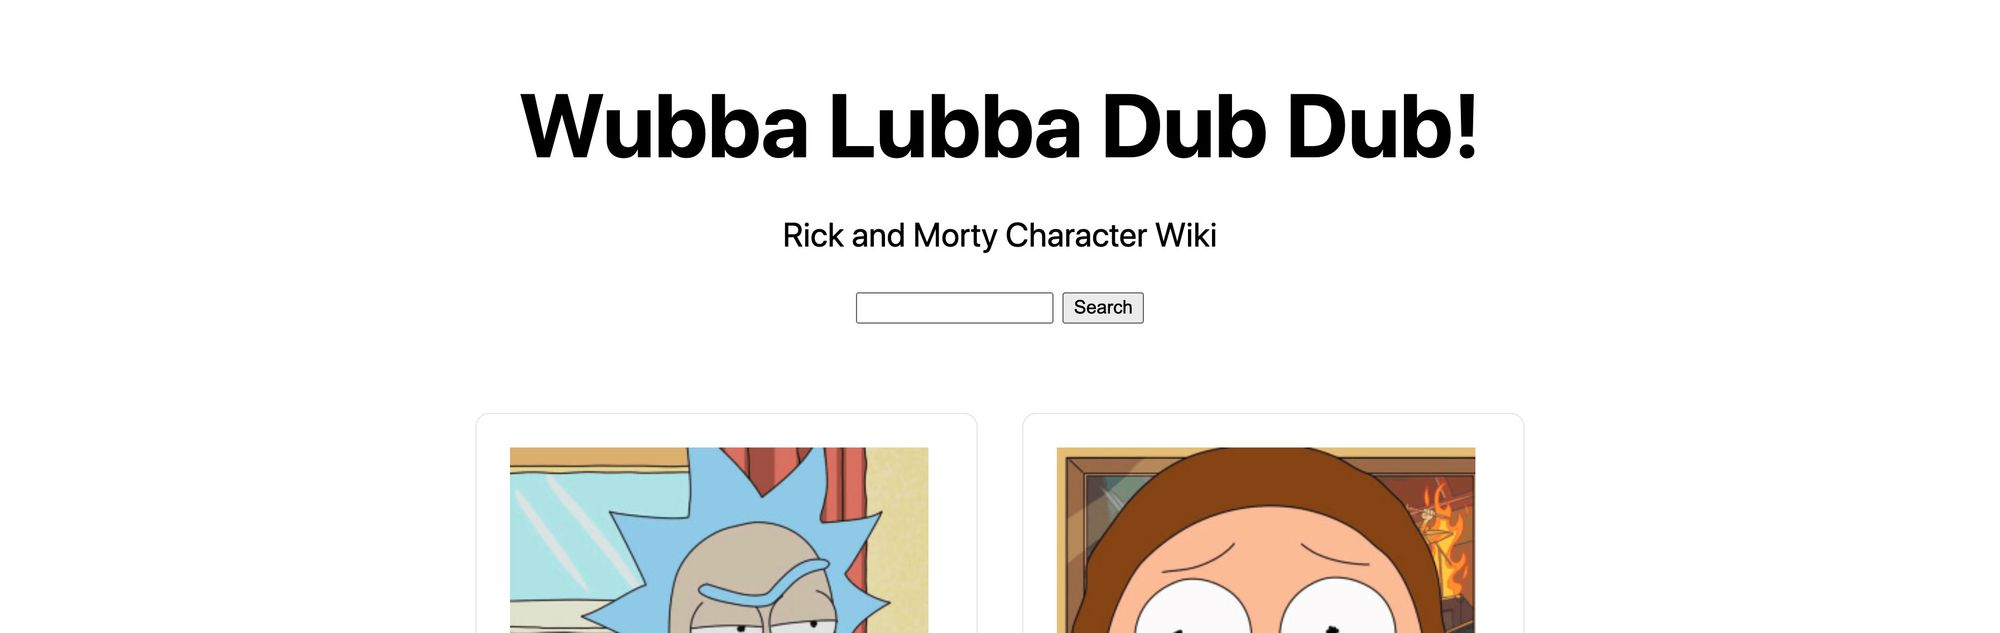 rick-and-morty-character-wiki-search-form